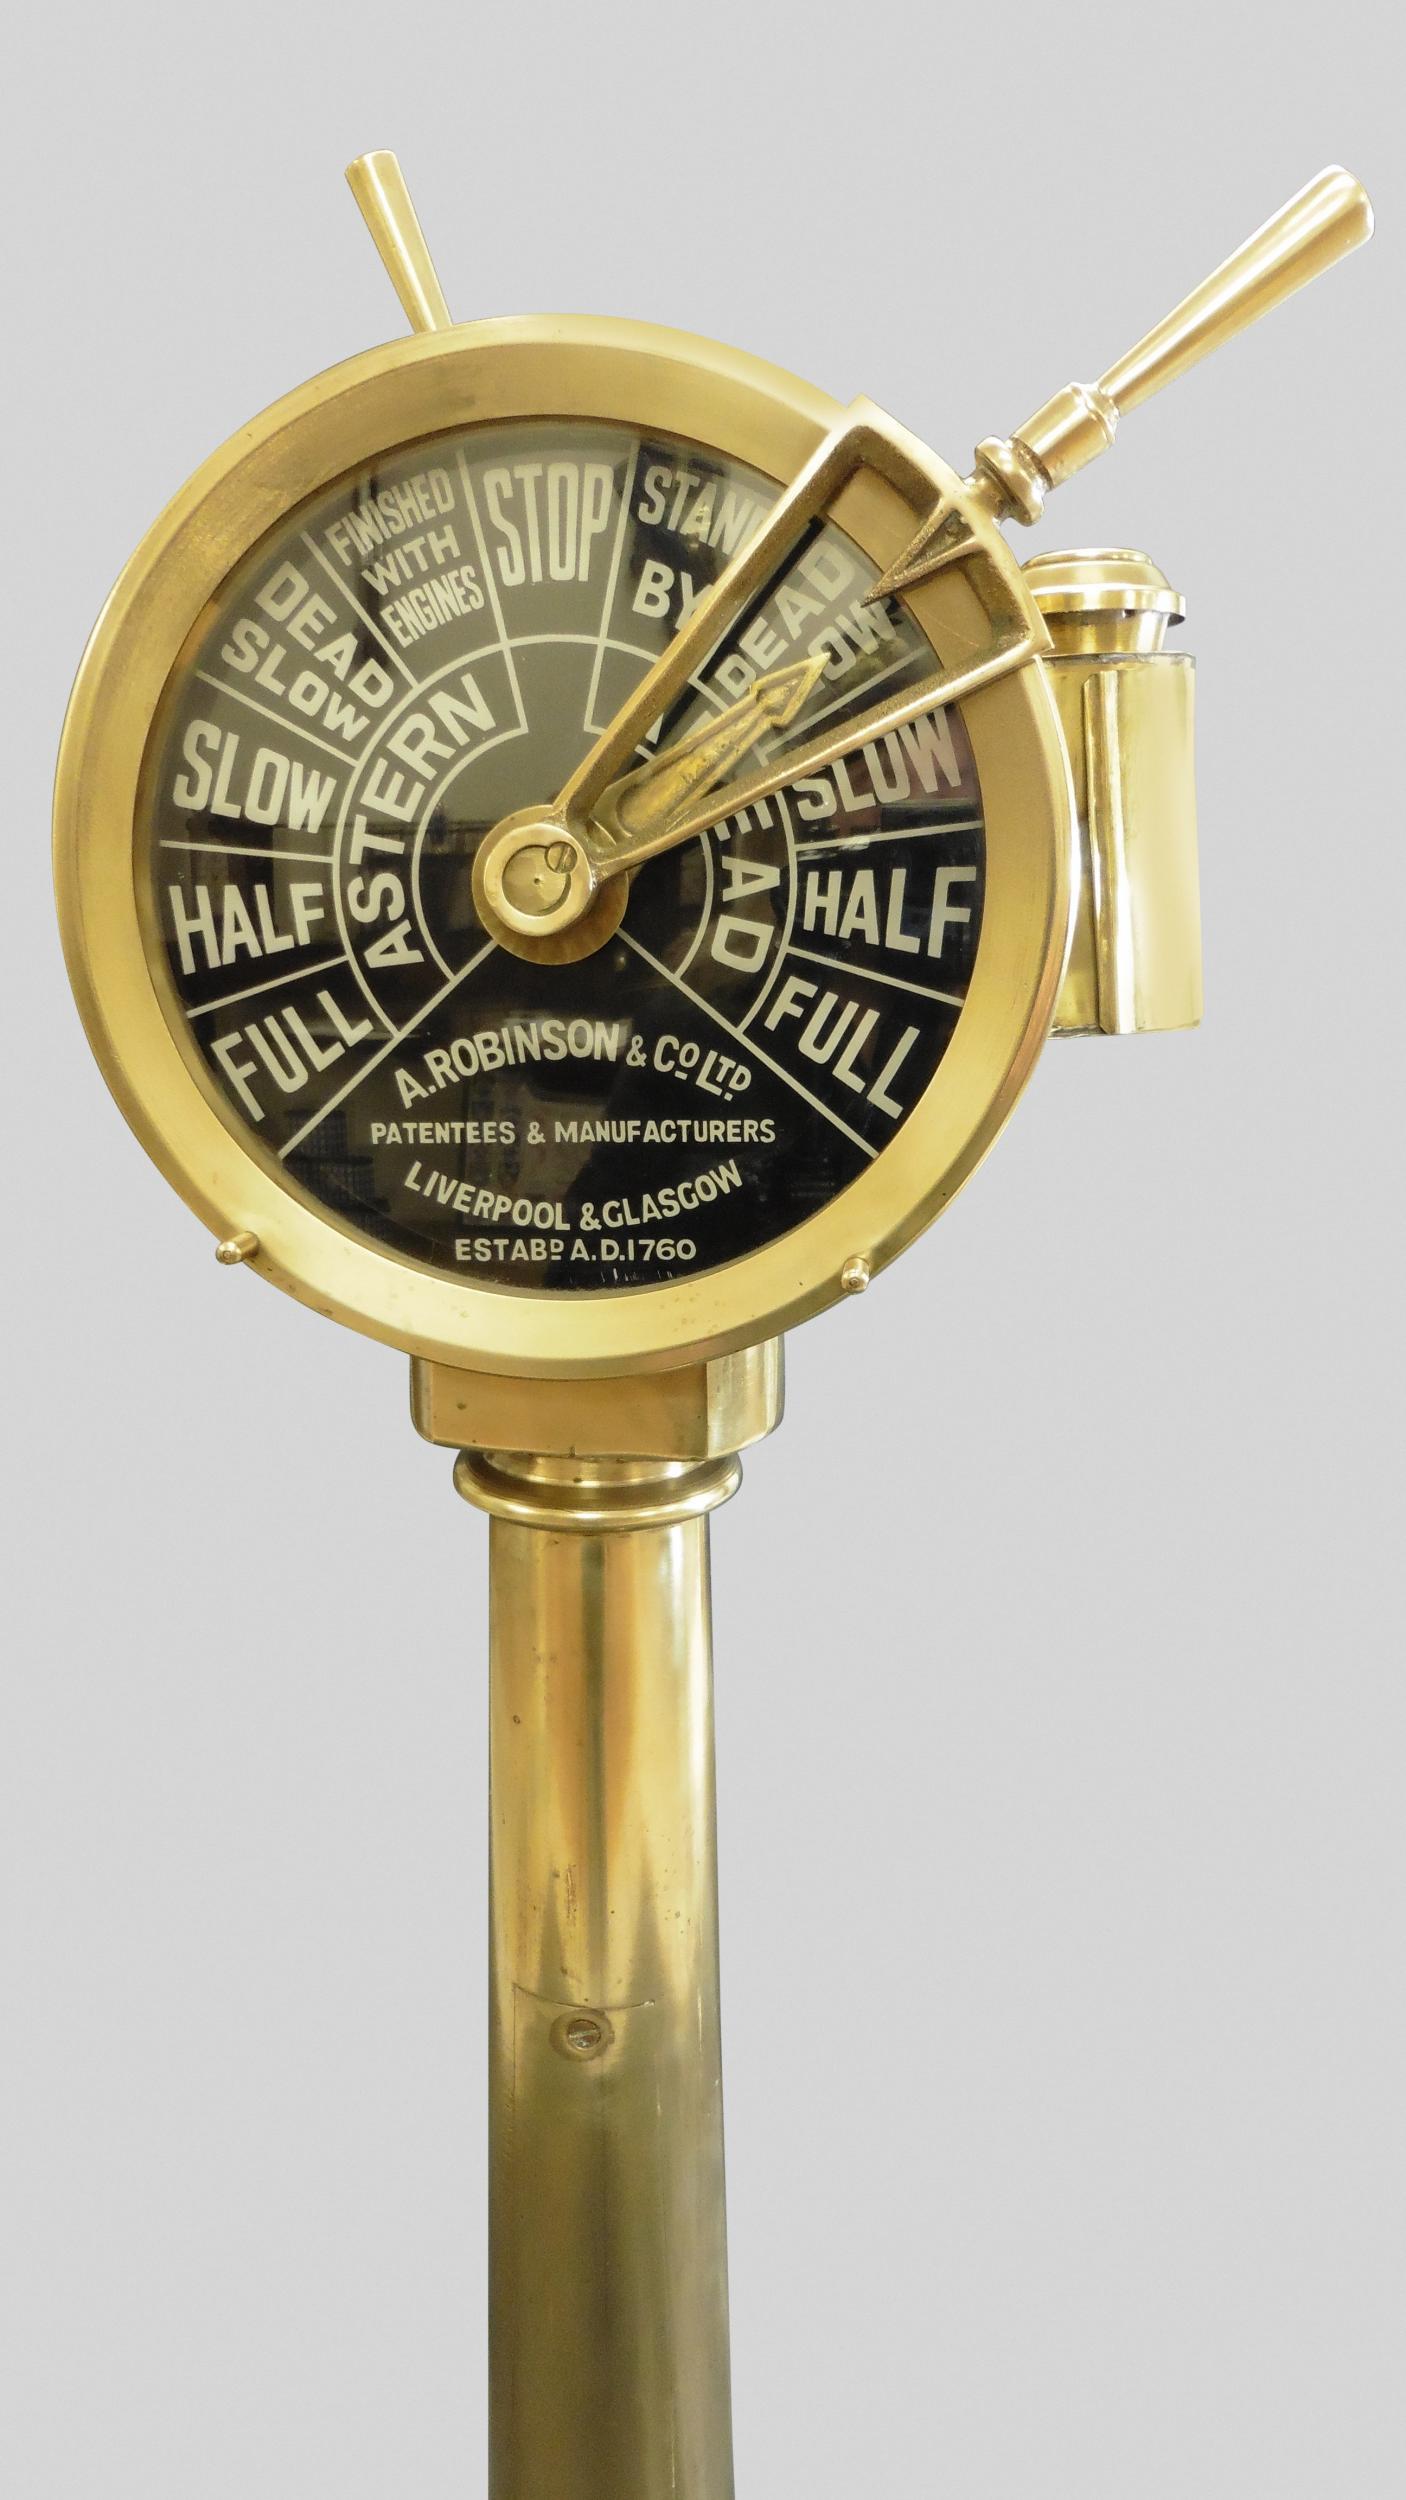 Edwardian ships telegraph, c.1900



Brass ships telegraph standing on a later turned, chamfered mahogany base with two conforming black enamel dials signed ‘A.Robinson and Co Ltd, Patents and manufacturers, Liverpool and Glasgow, Established